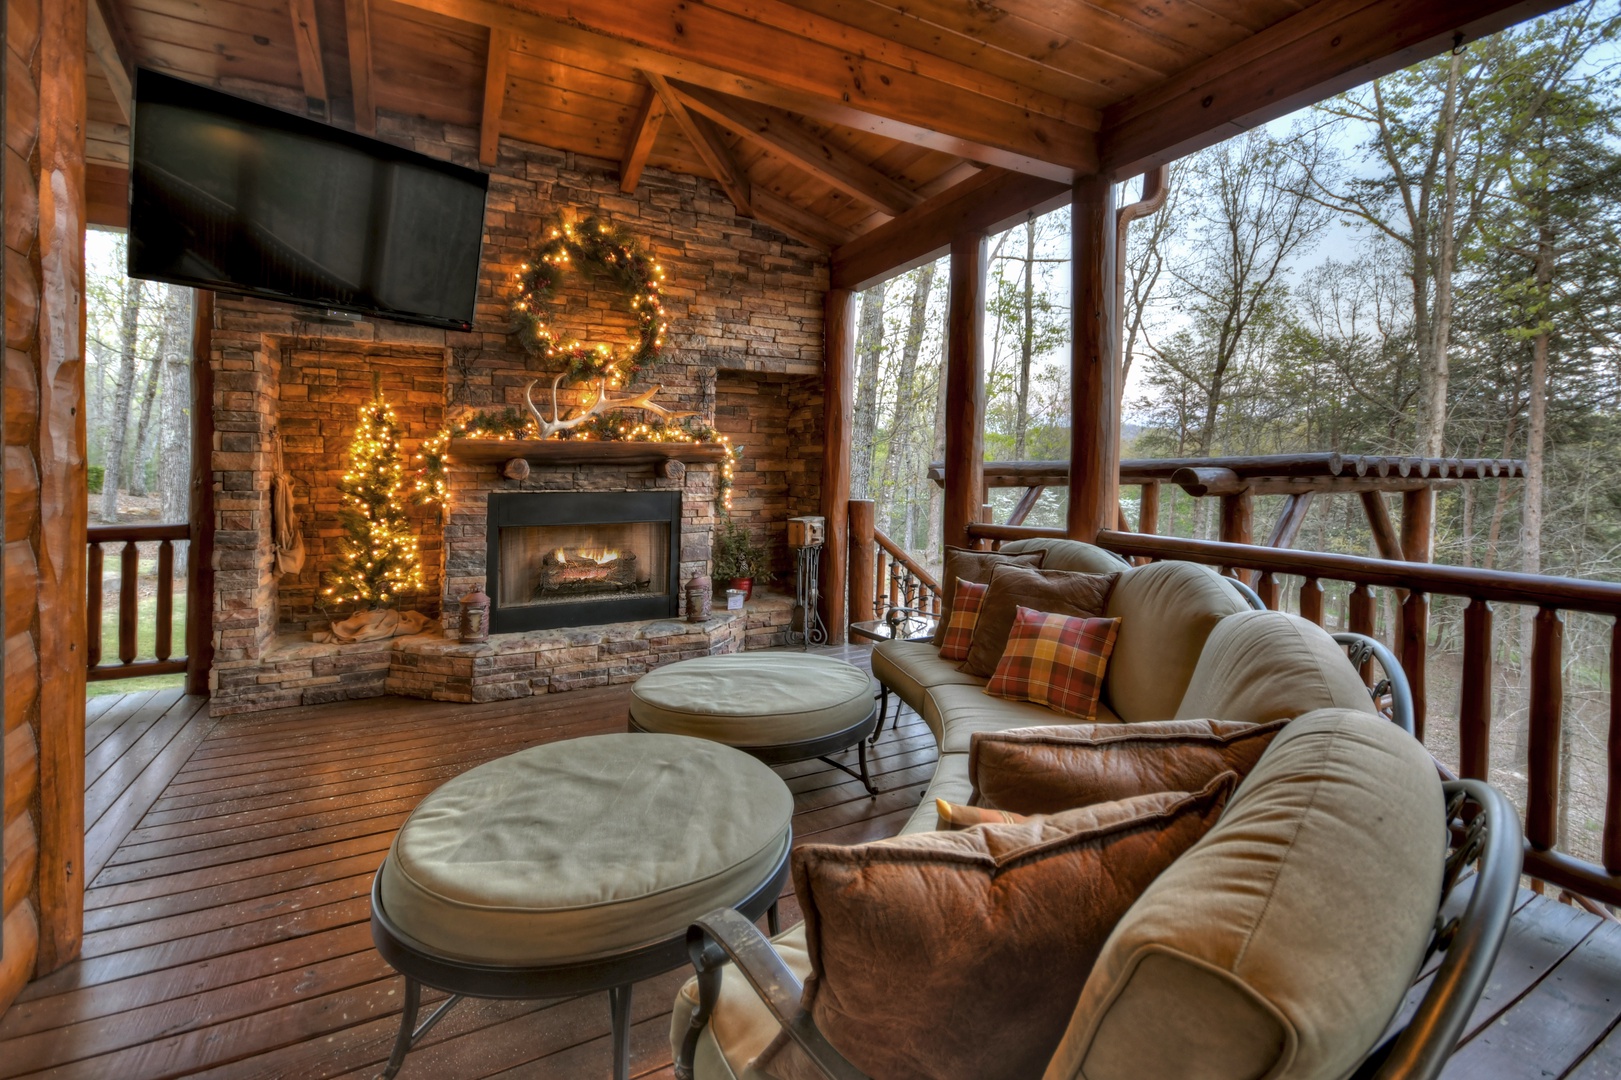 Sassafras Lodge- Patio seating with a TV and fireplace